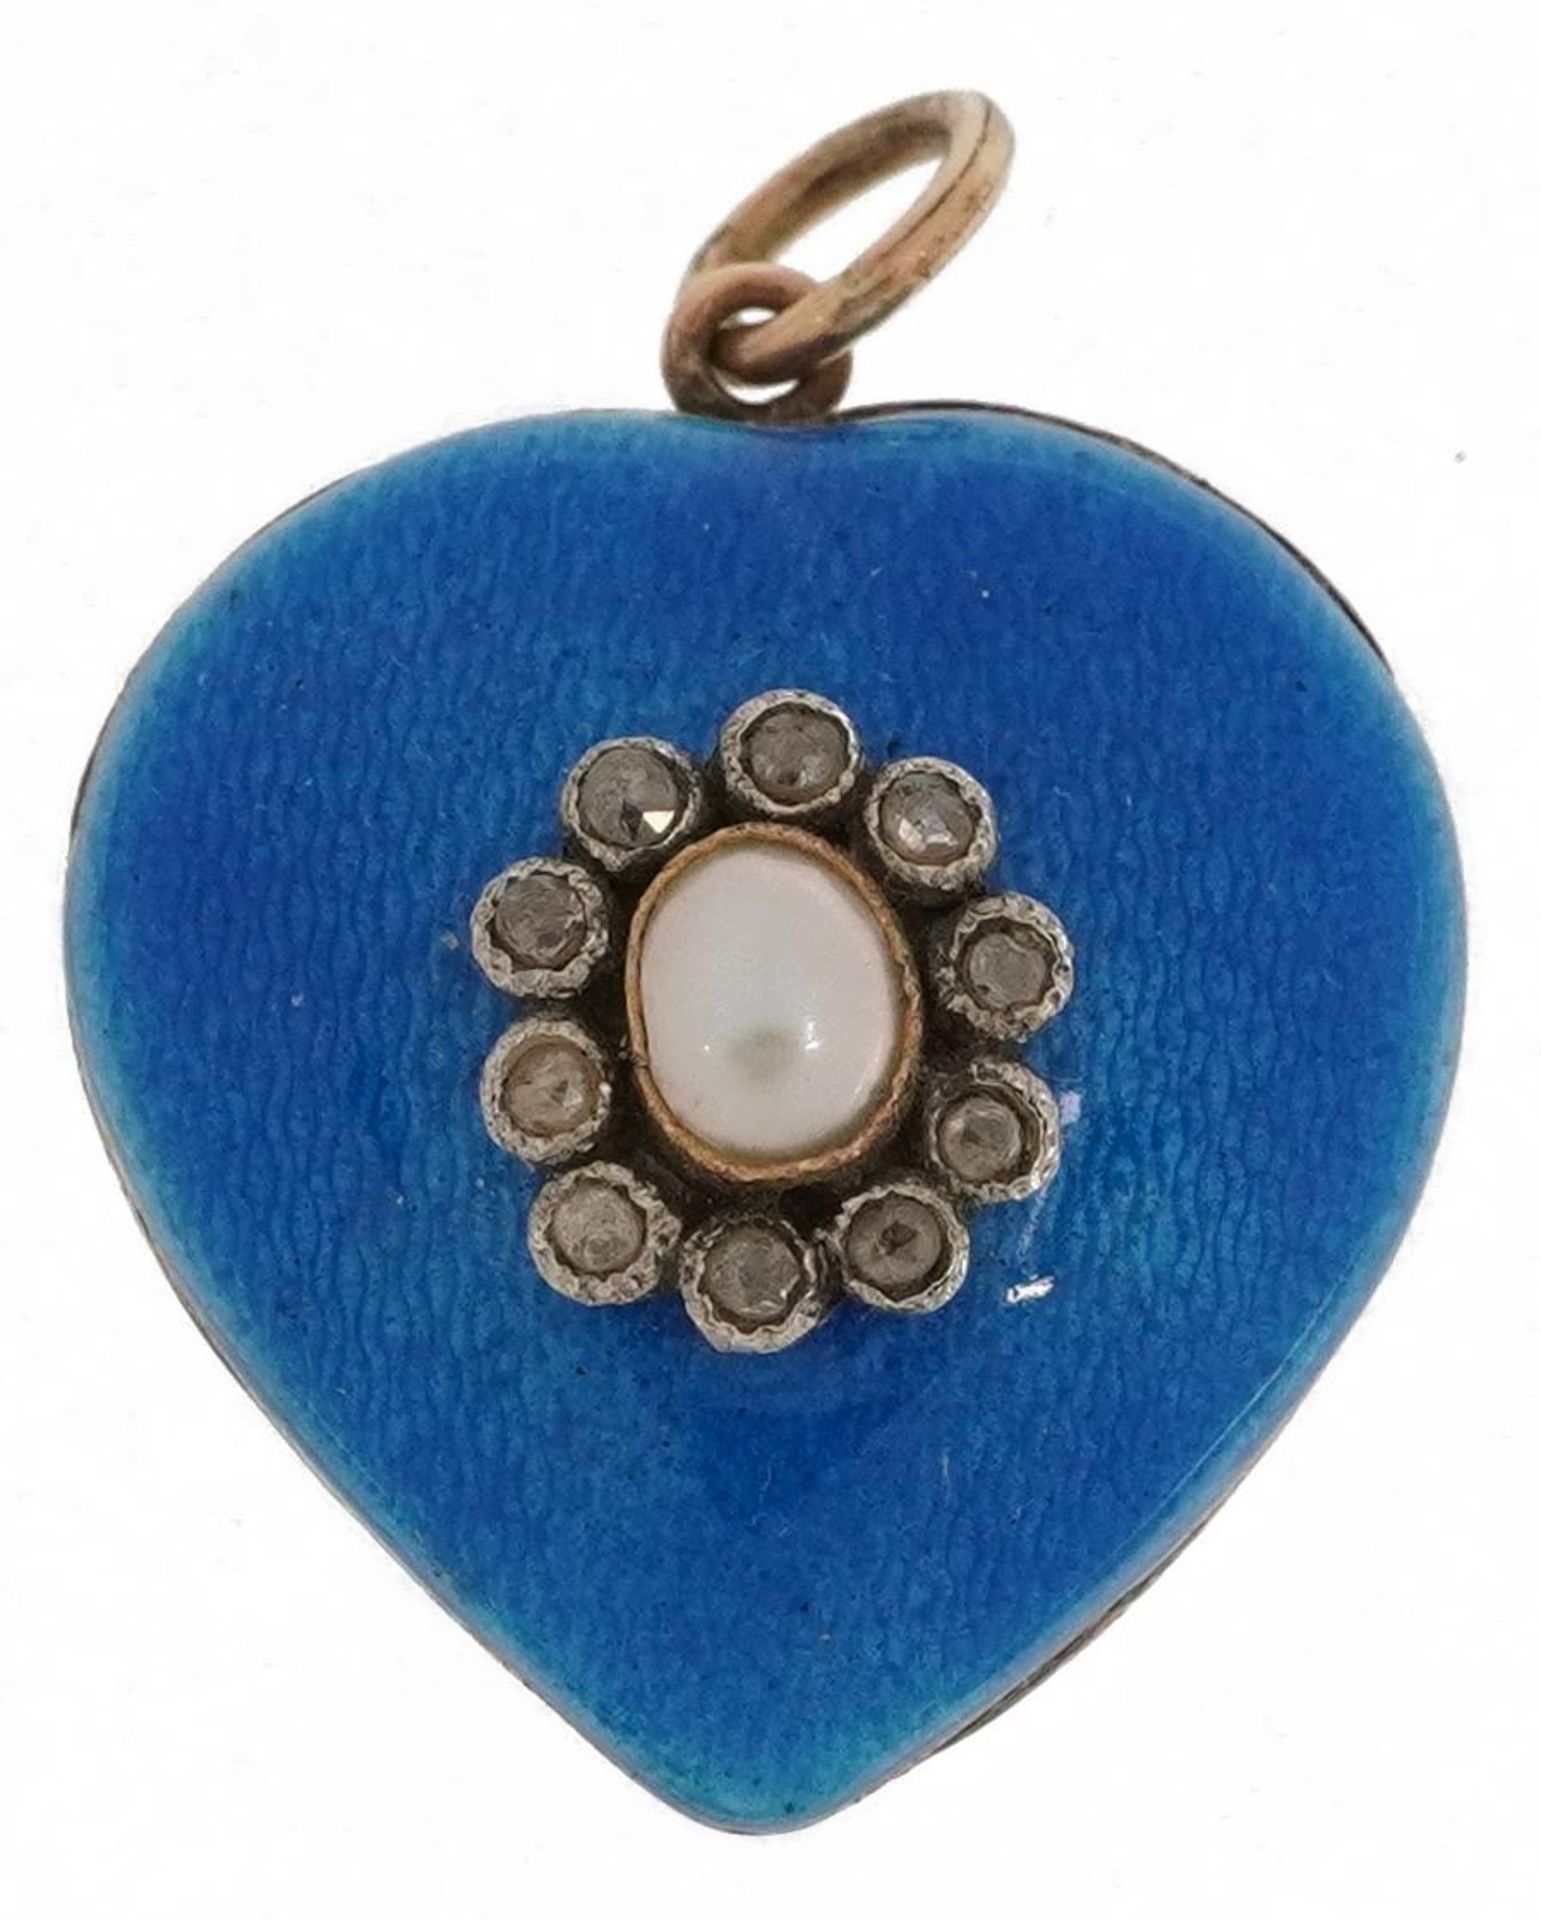 Unmarked gold blue guilloche enamel, diamond and cultured pearl love heart pendant, tests as 18ct